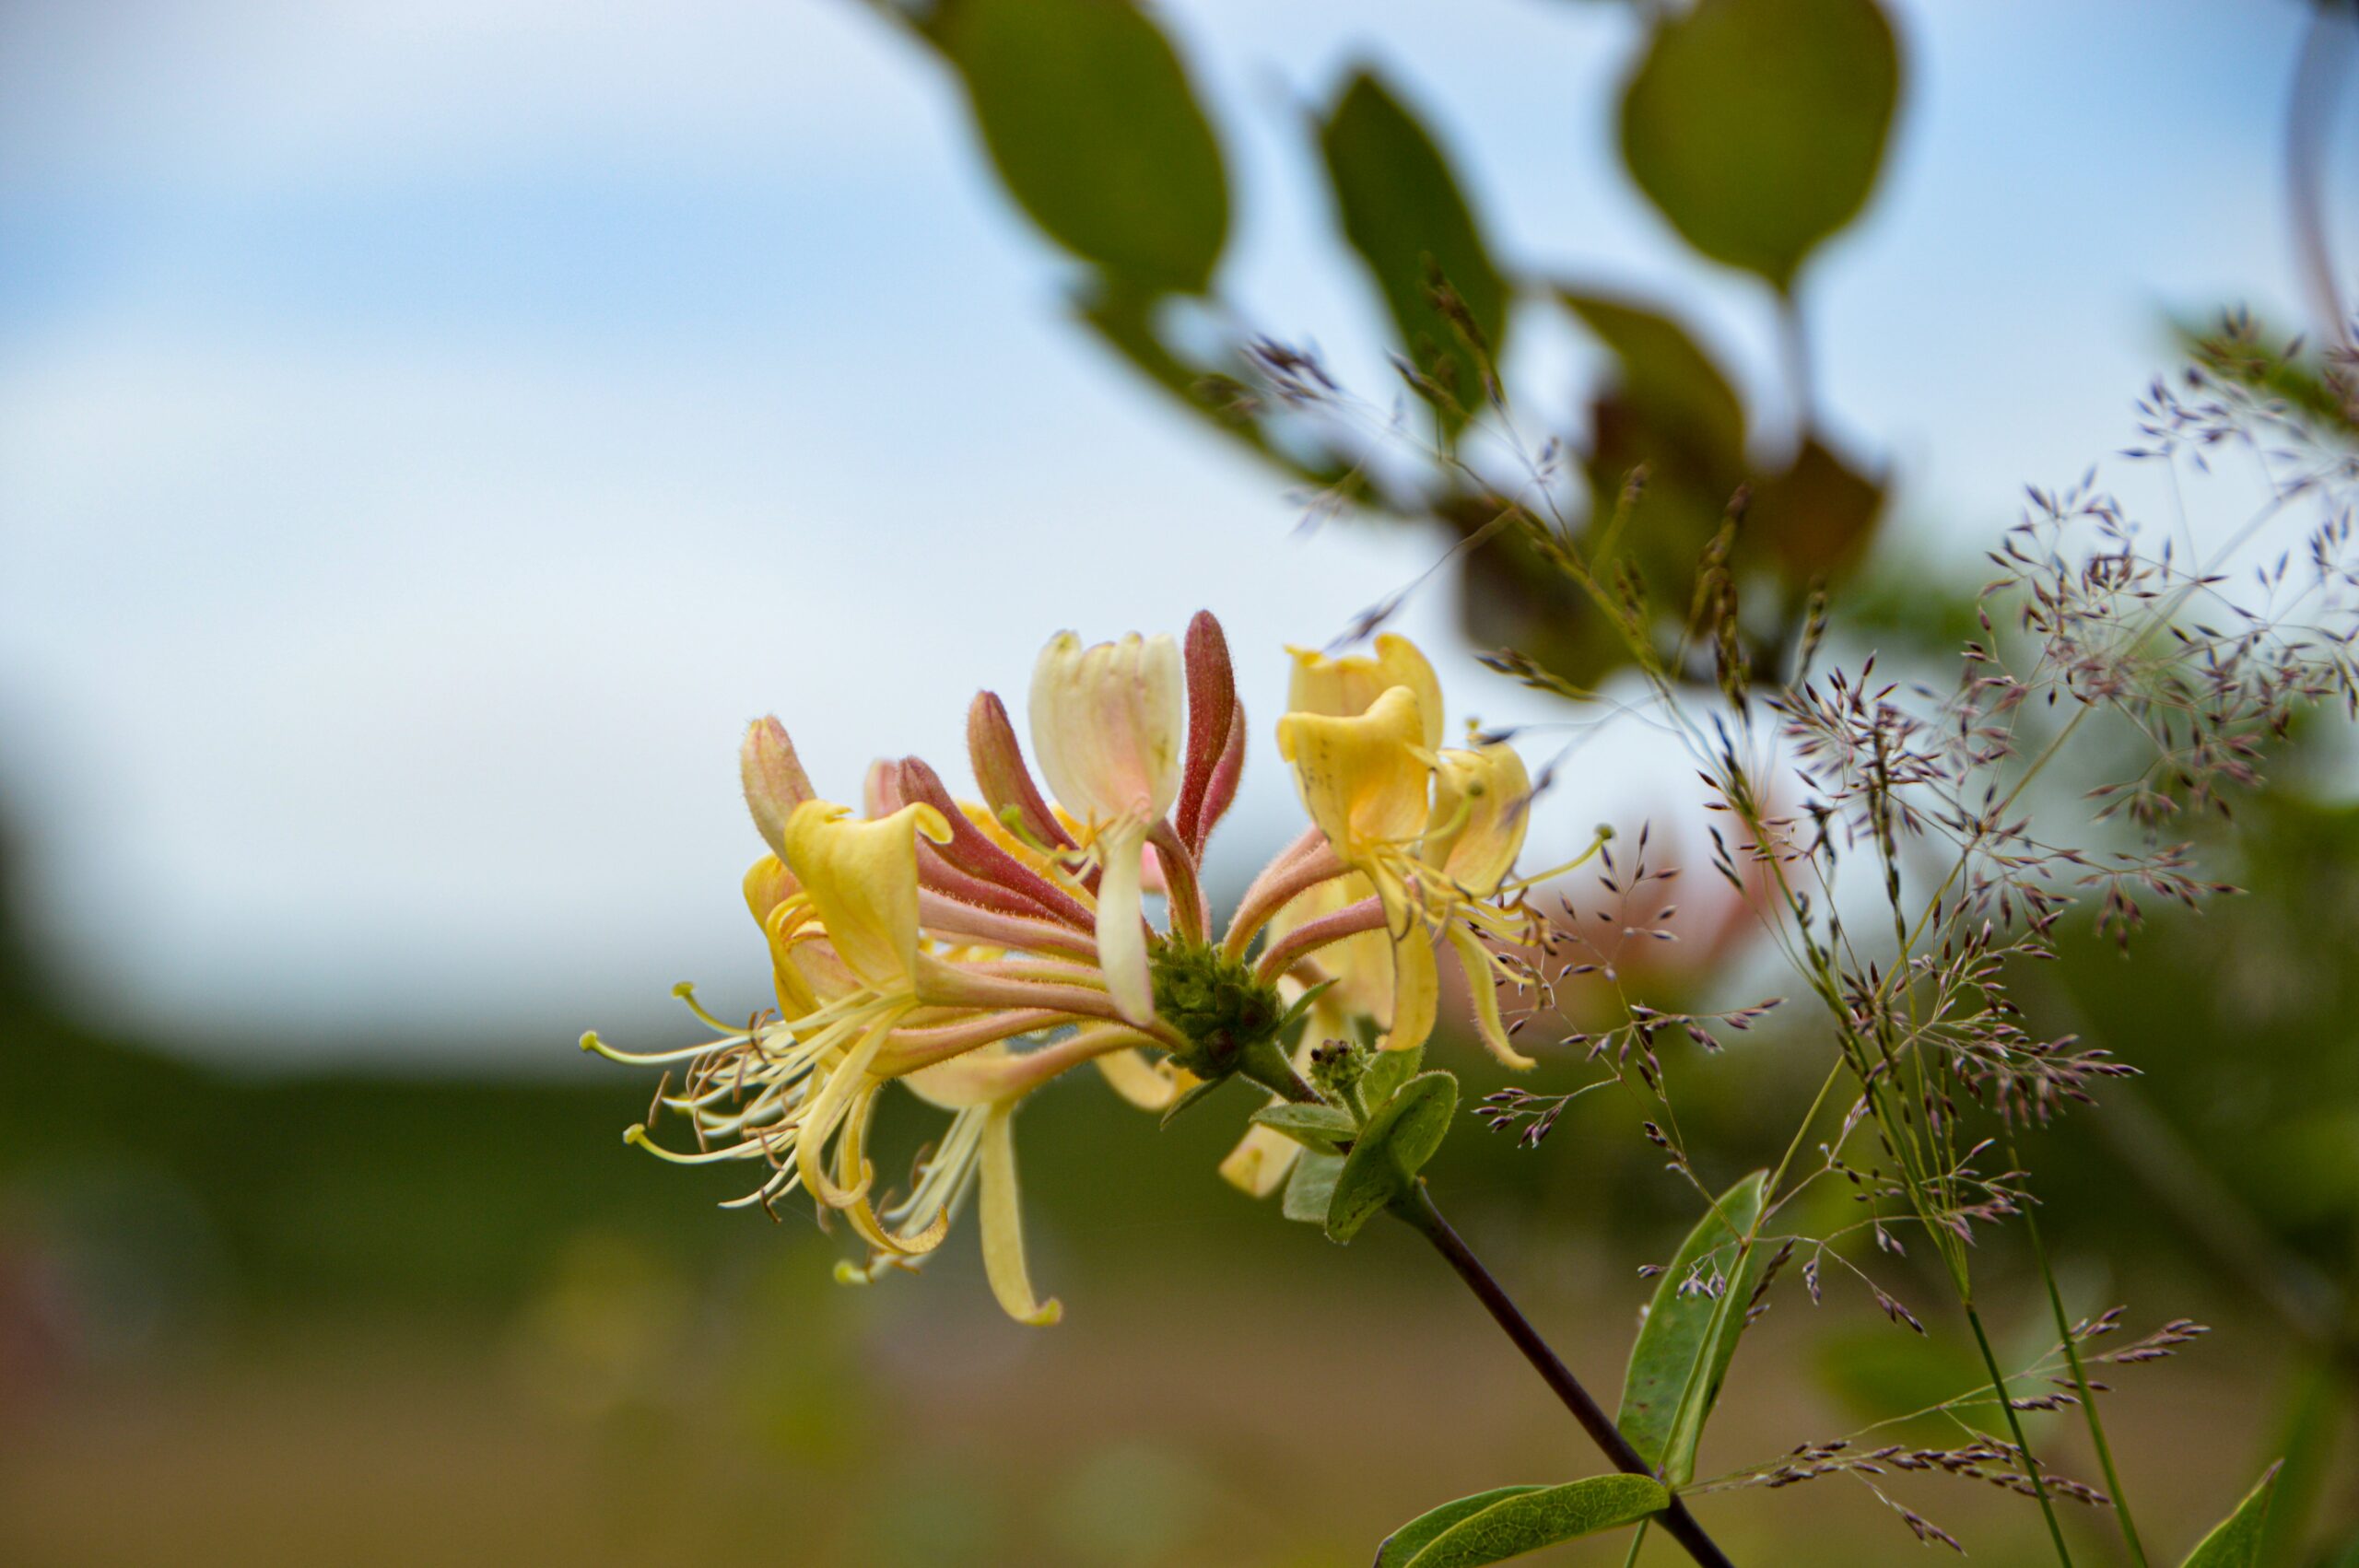 Coral honeysuckle is a must-have plant to get some Fall colors going for Tampa Bay autumn.